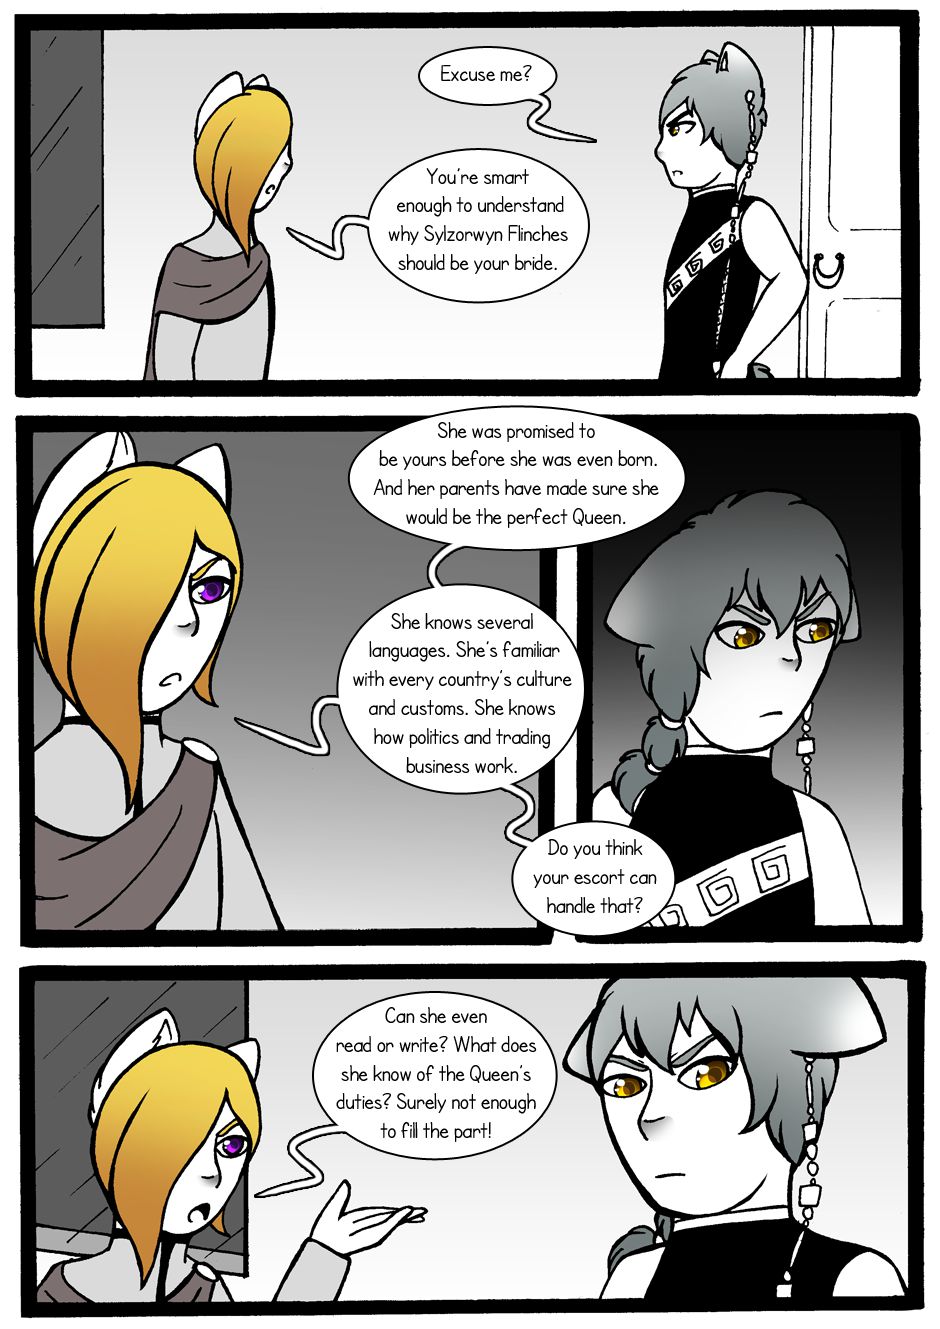 [Jeny-jen94] Between Kings and Queens [Ongoing] 96